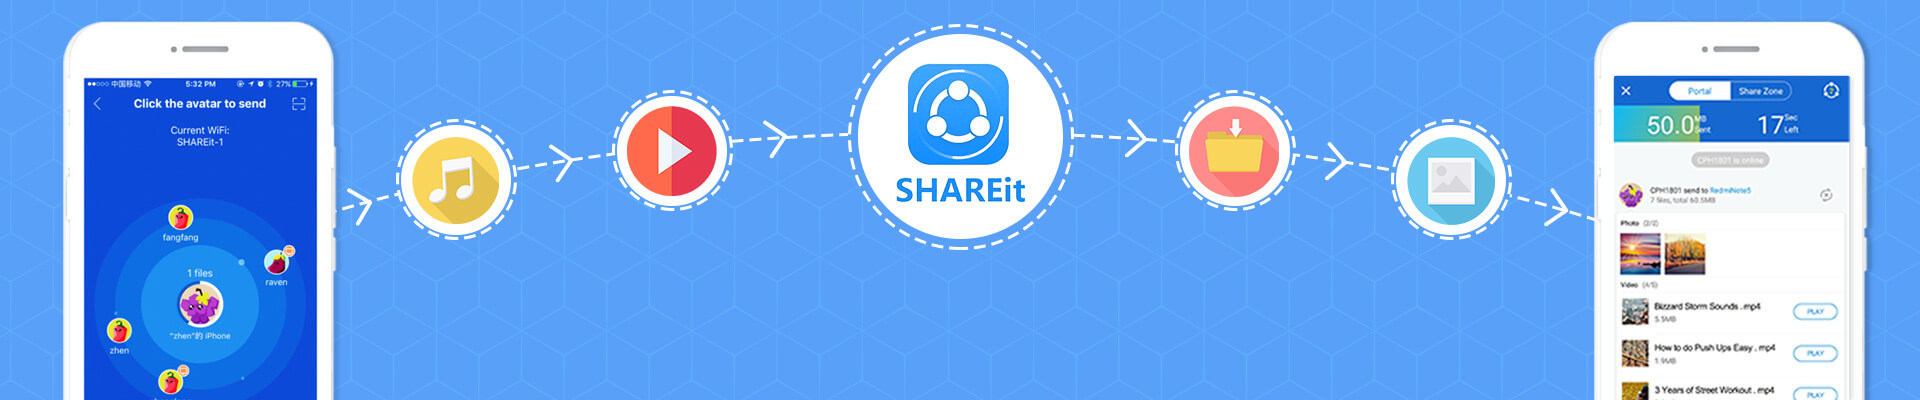 How Much Does It Cost To Develop An App Like SHAREit?